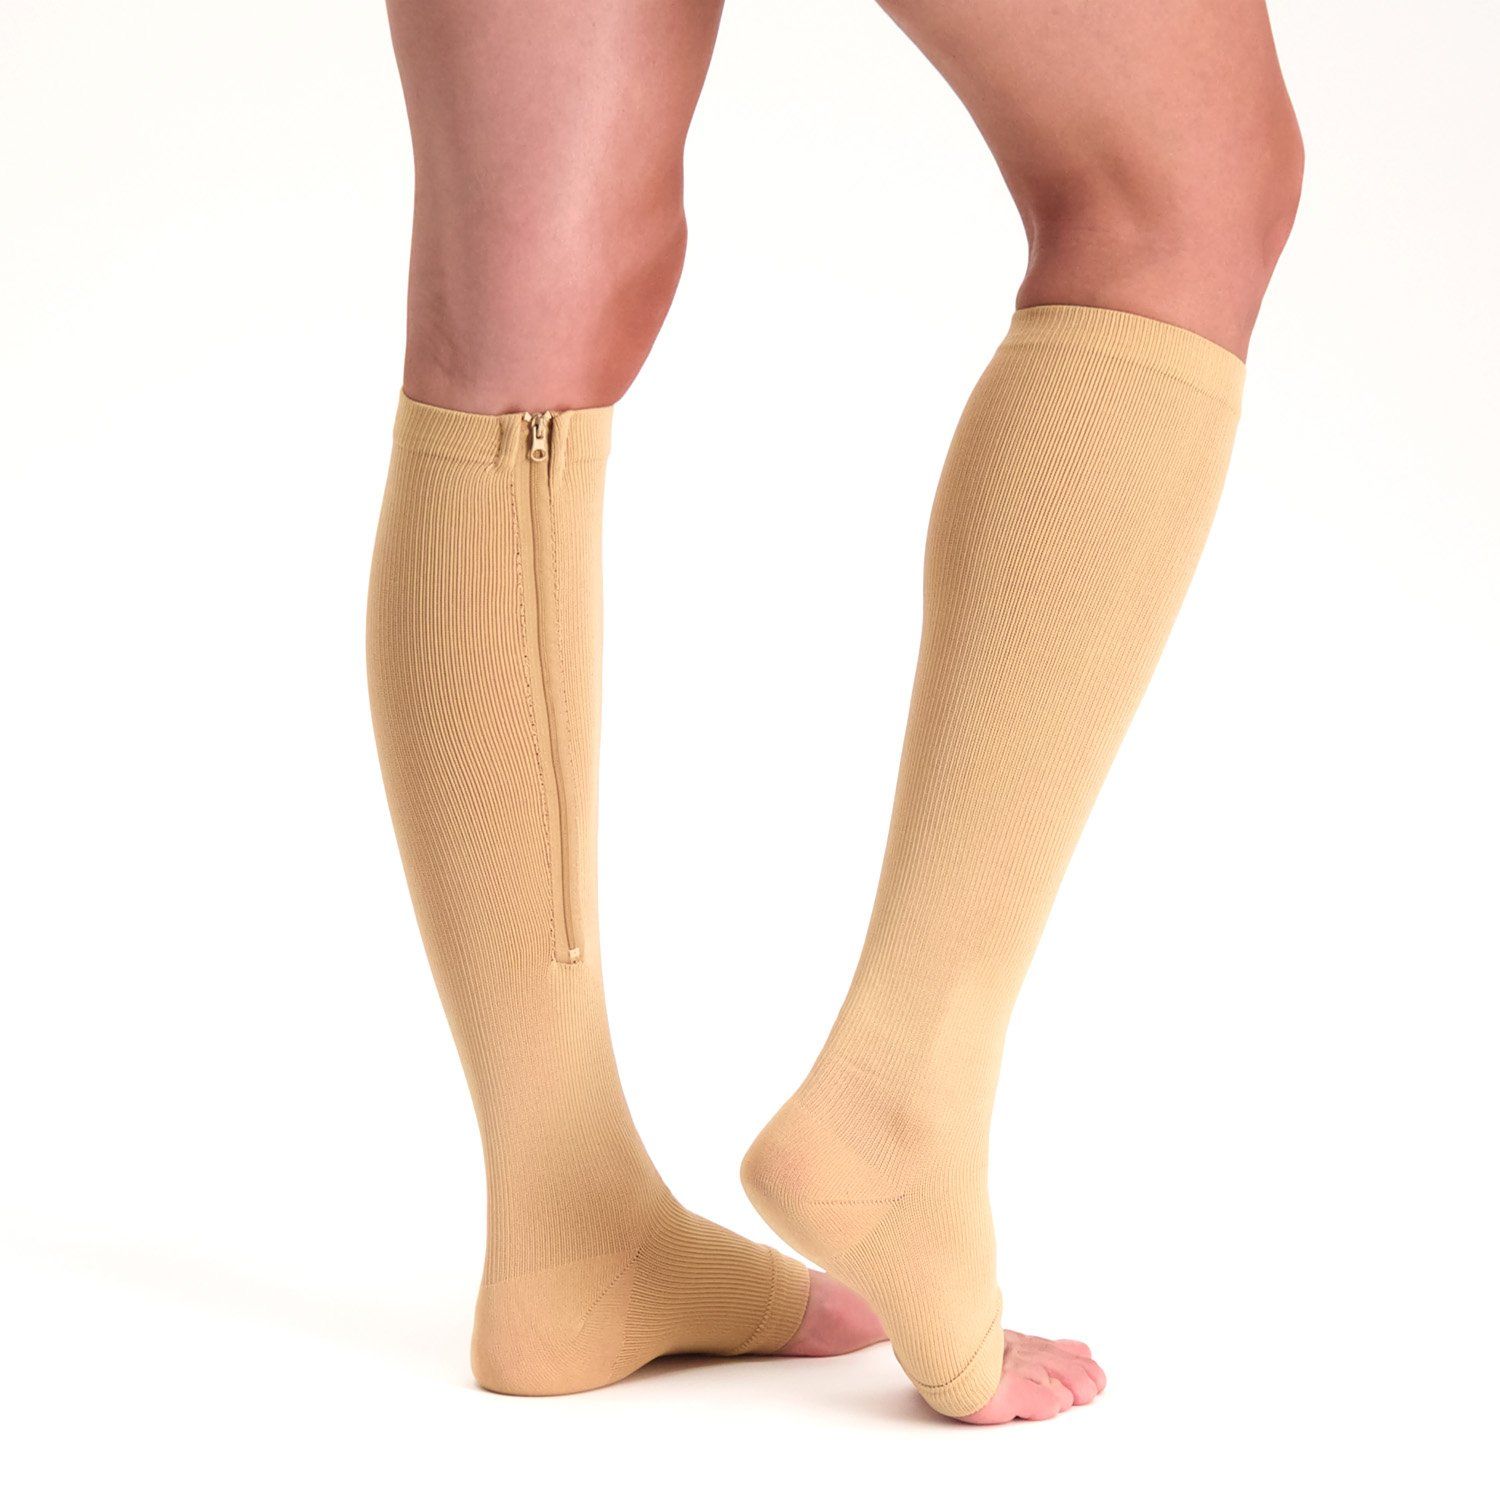 Support Stocking with Zipper - Open Toe - worn by model